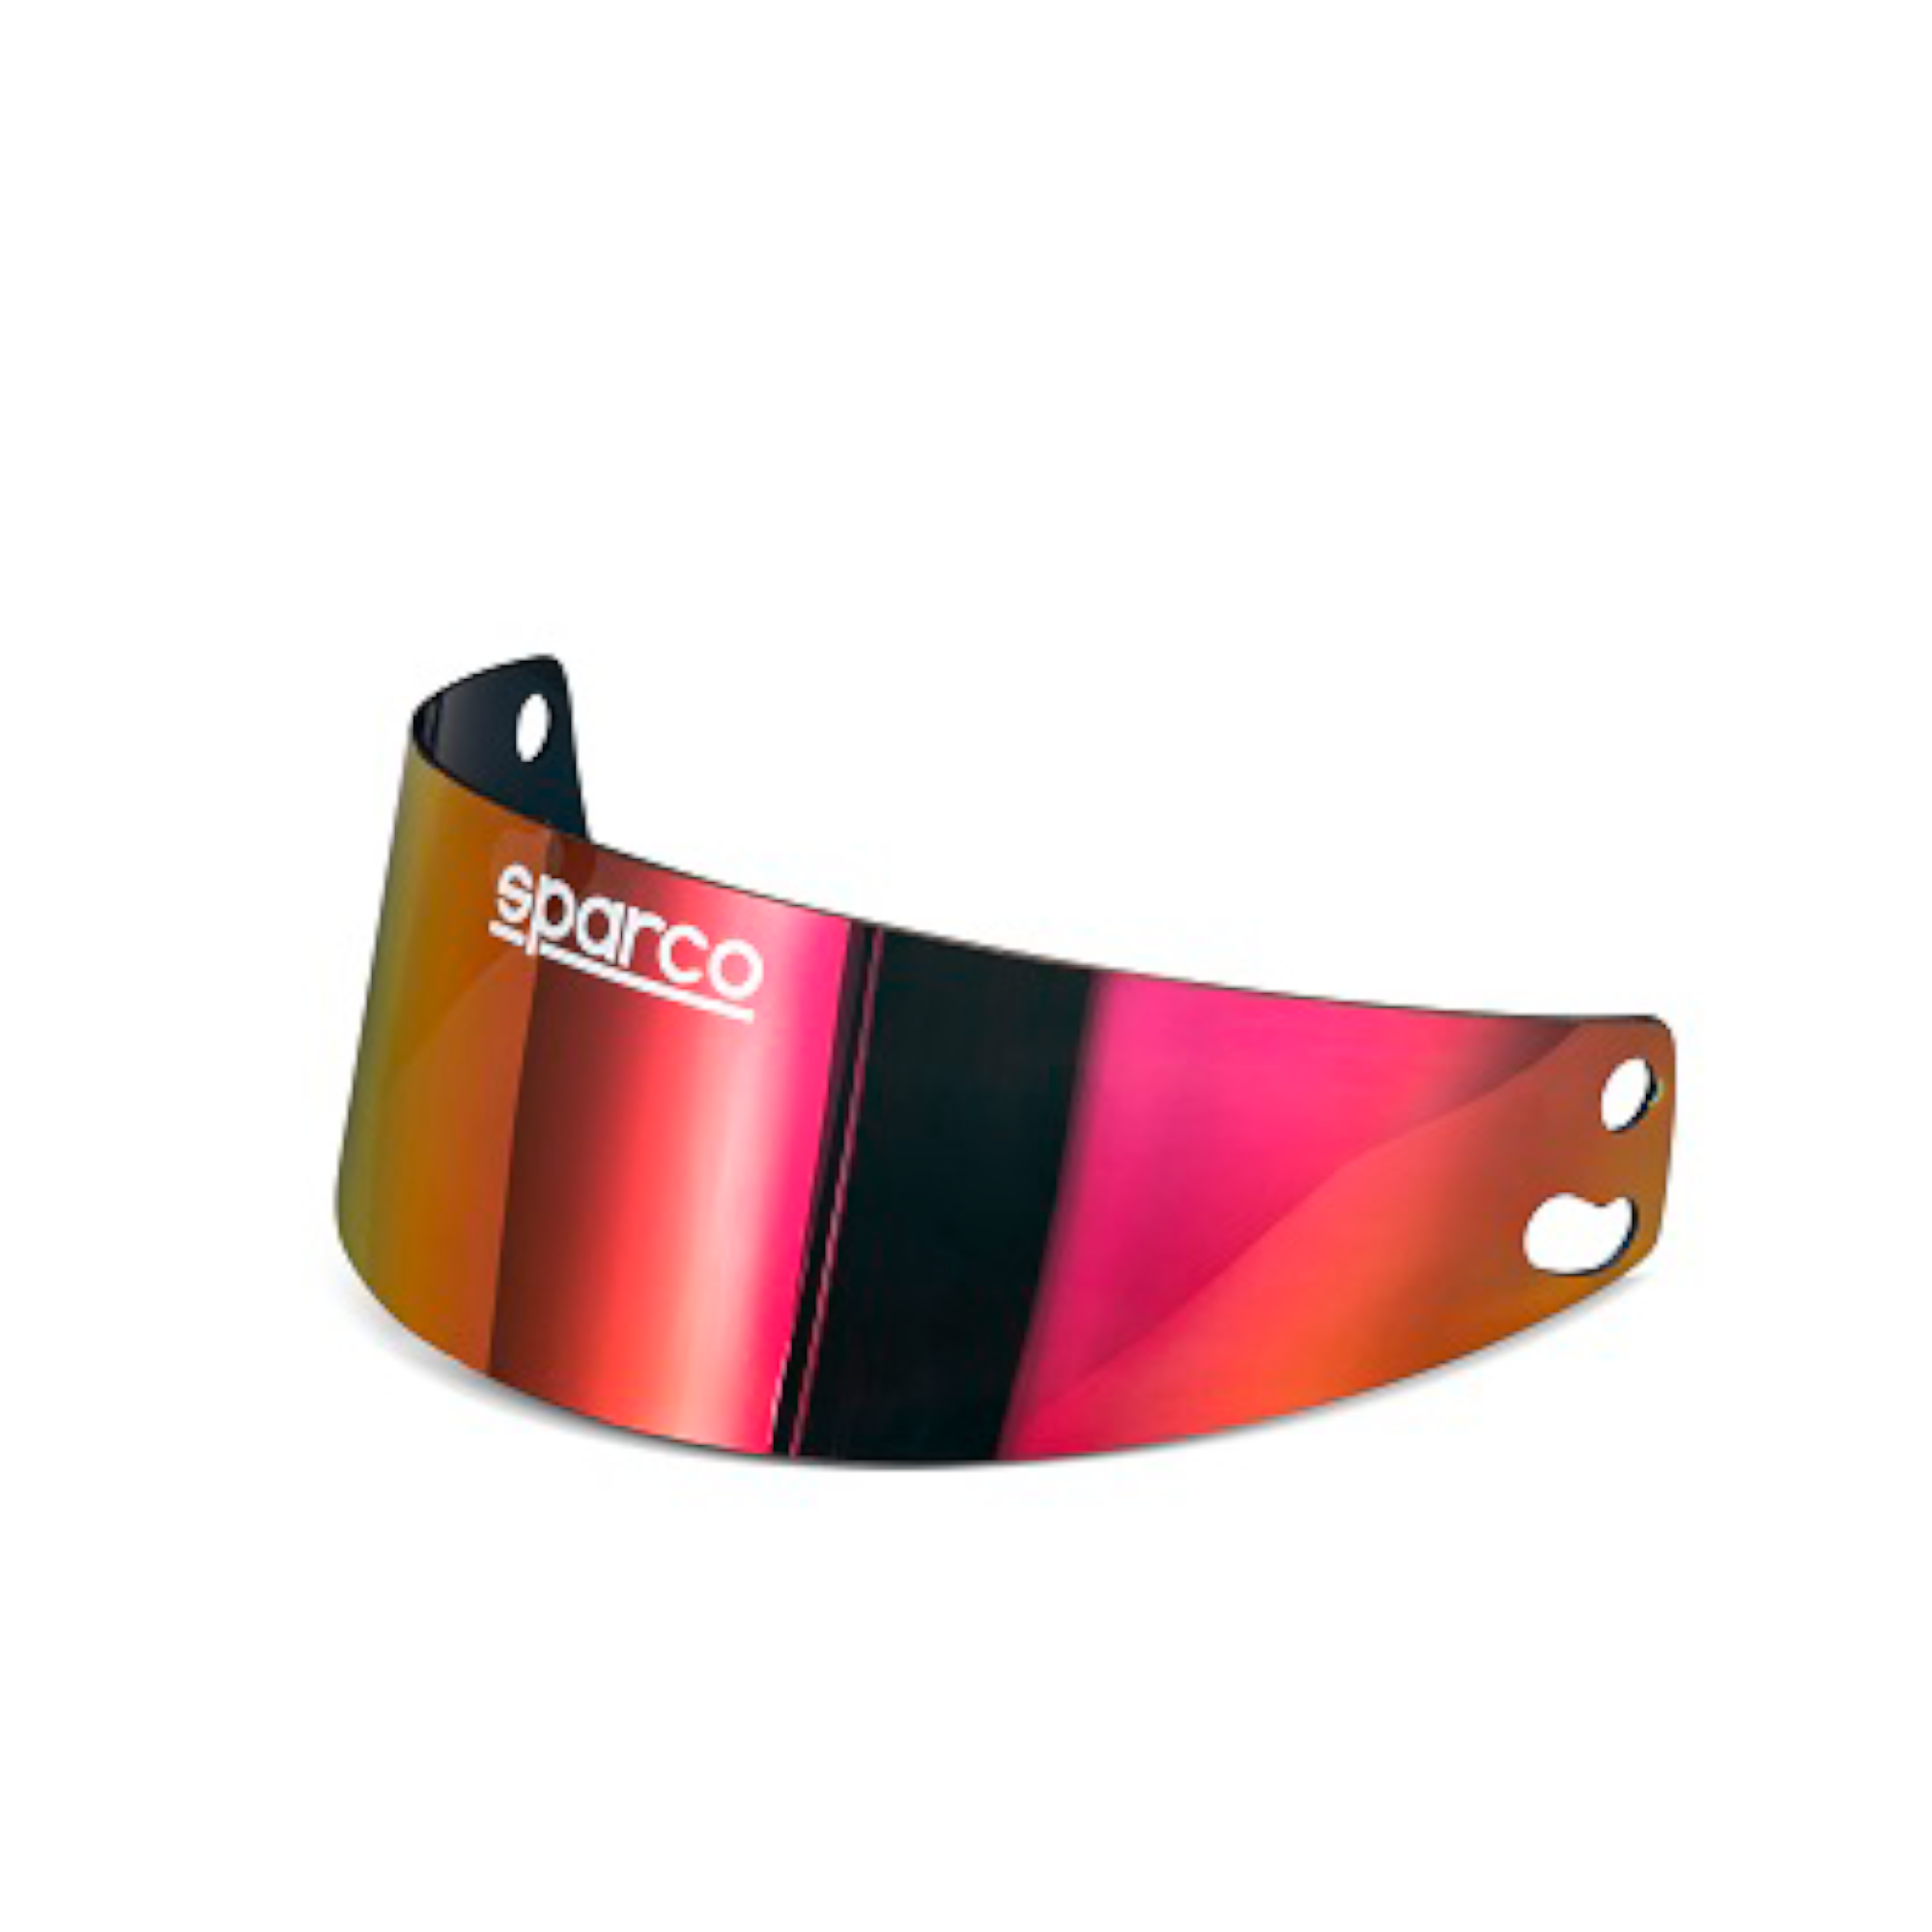 VISOR 8859 MY22 (RED) - Sparco Shop